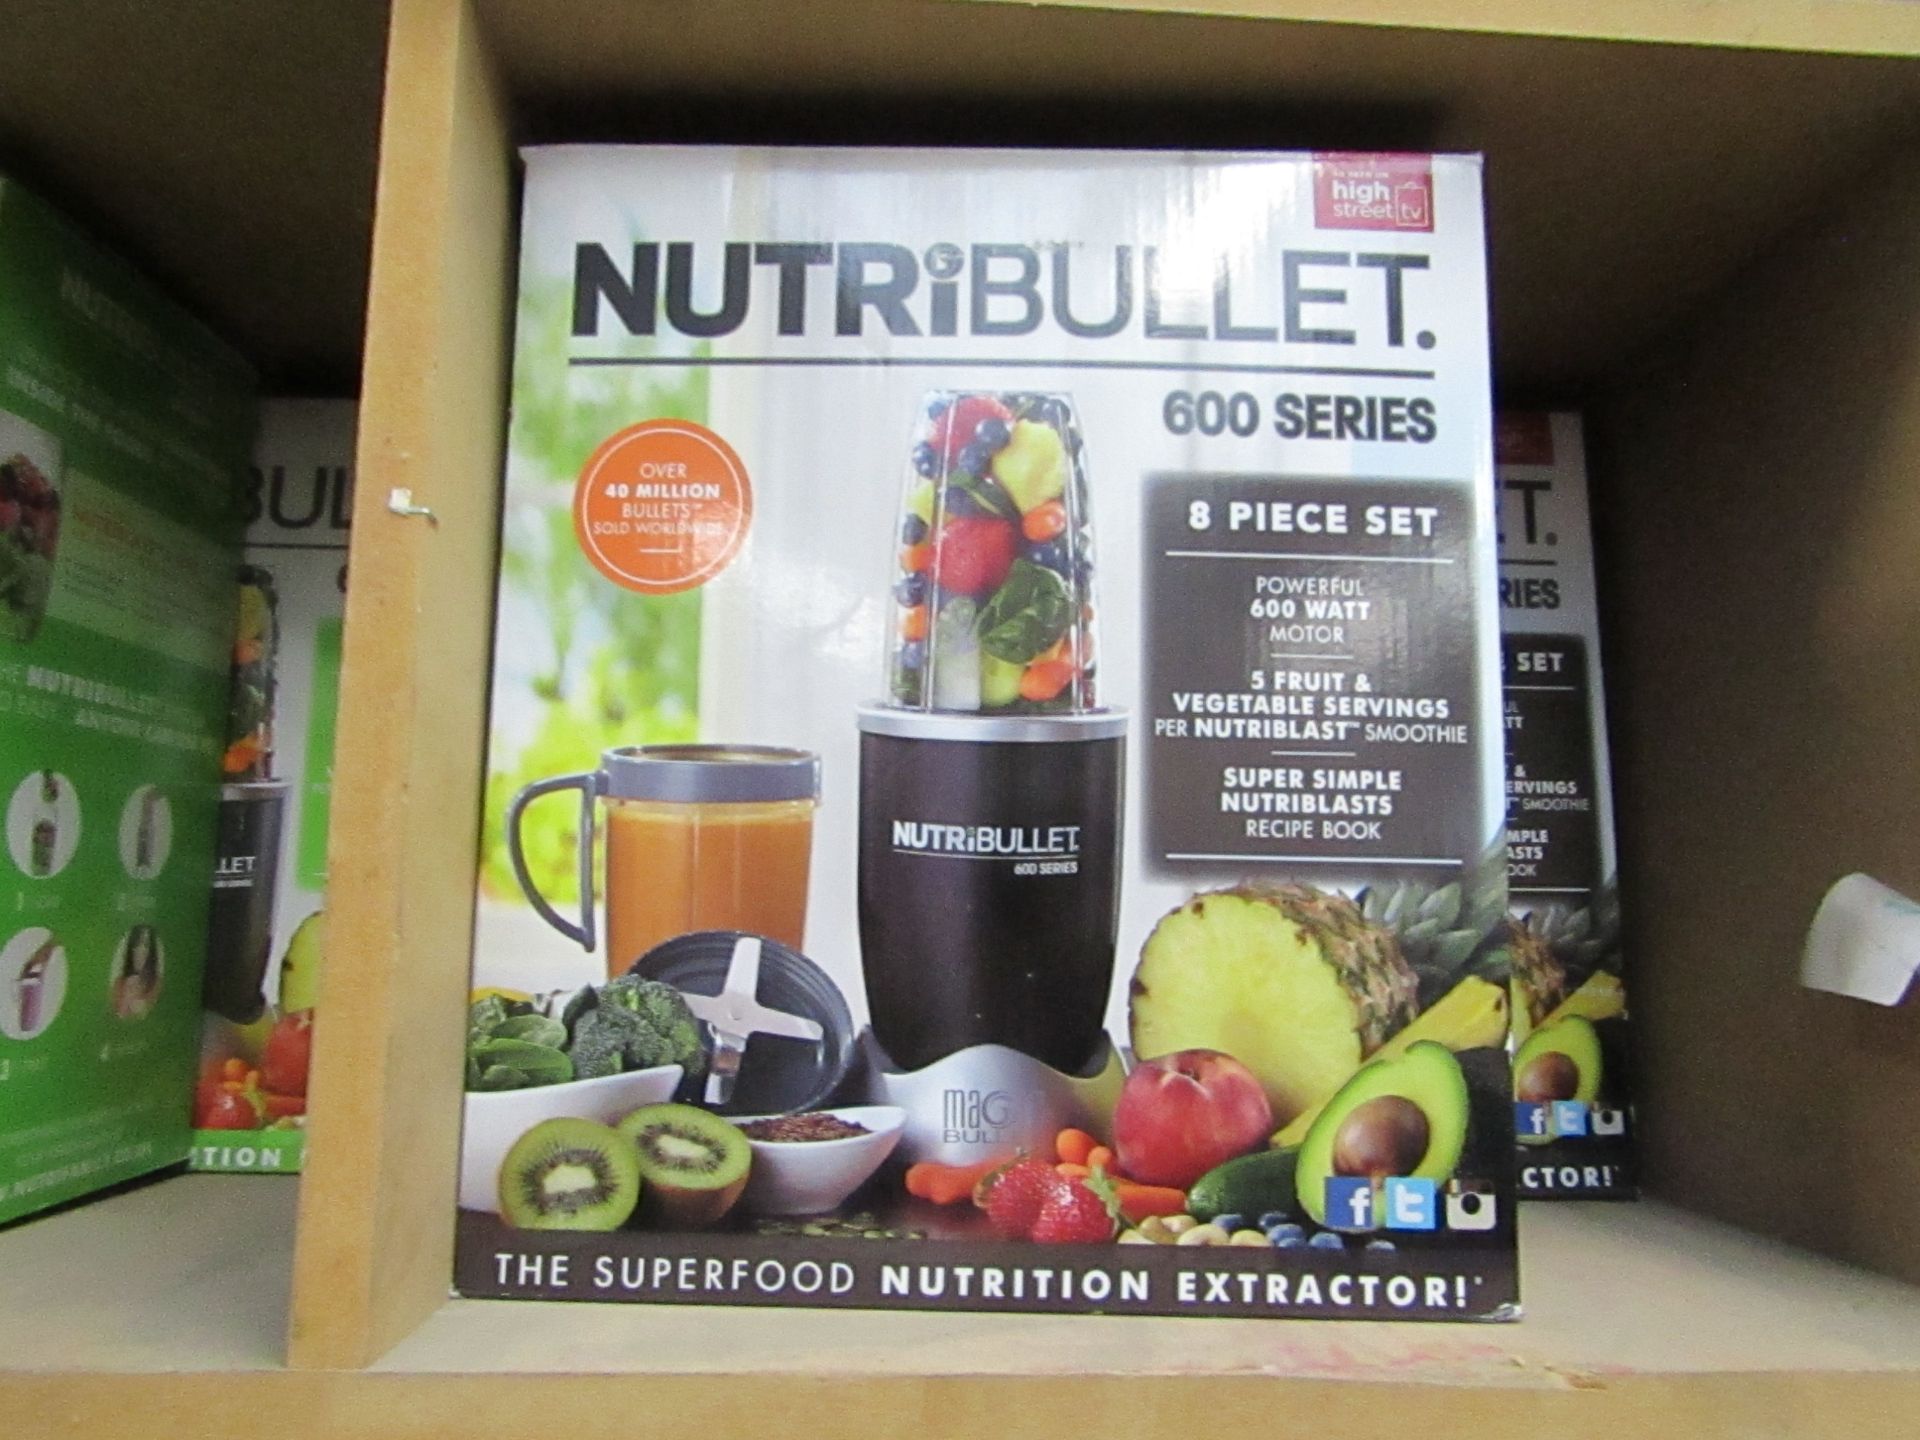 | 1X | NUTRIBULLET 600 SERIES | UNCHECKED AND BOXED | NO ONLINE RE-SALE | SKU C5060191467346 |